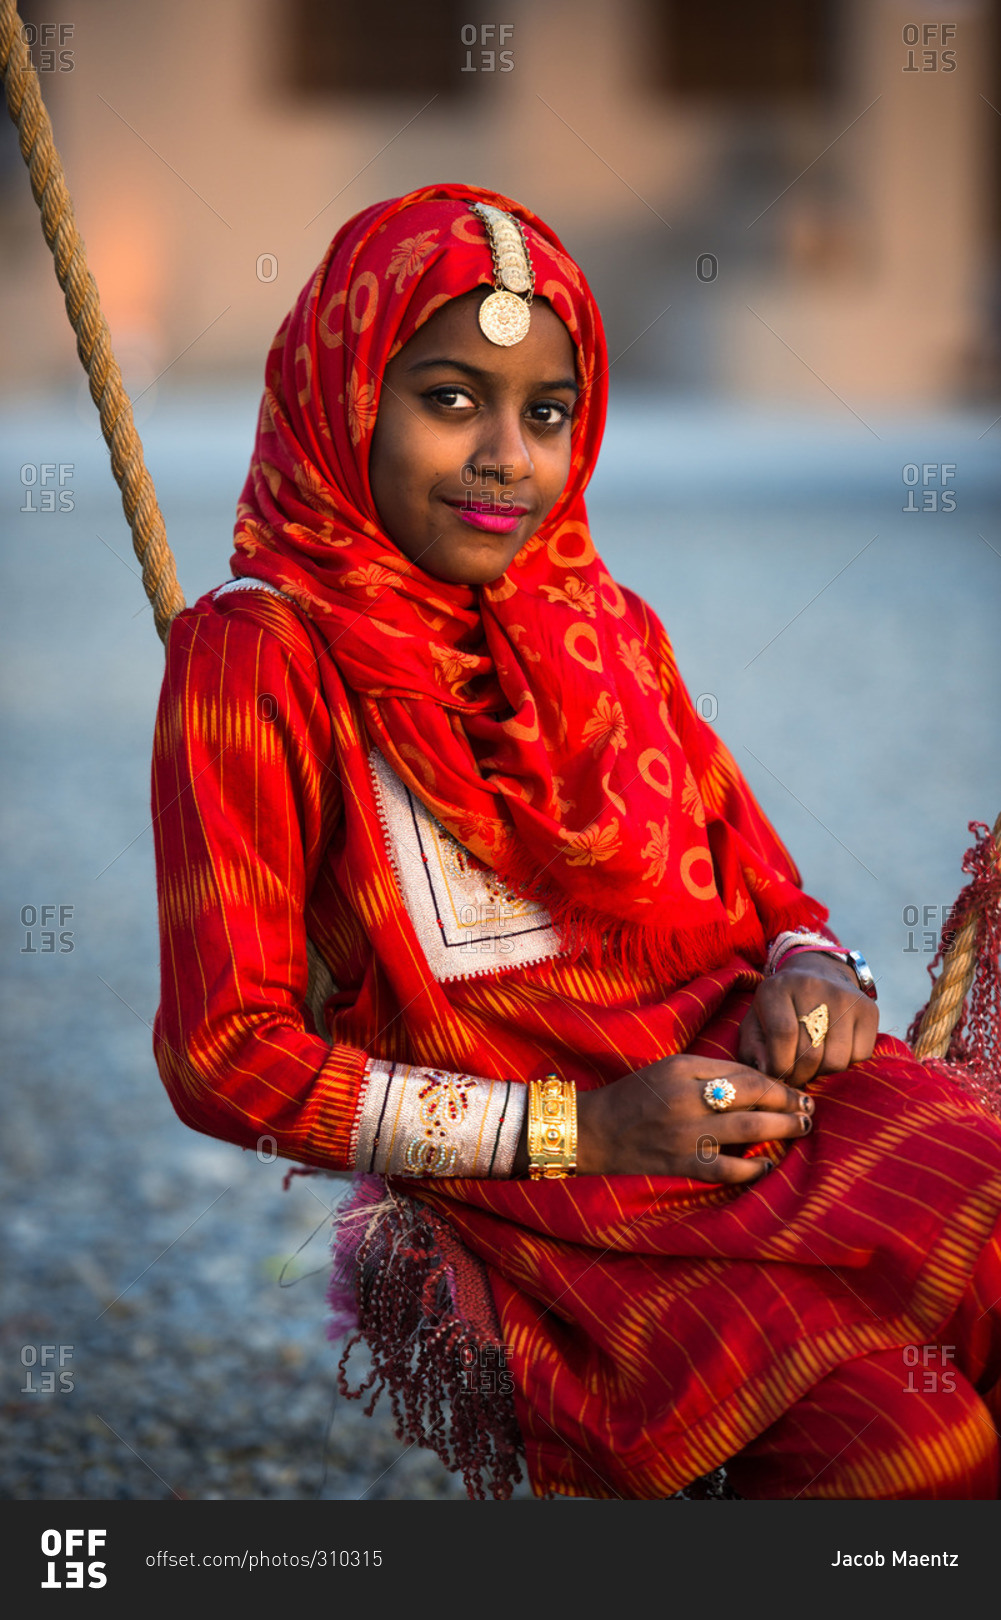 Muscat, Oman - February 4, 2015: Portrait of an Omani girl stock photo - OFFSET